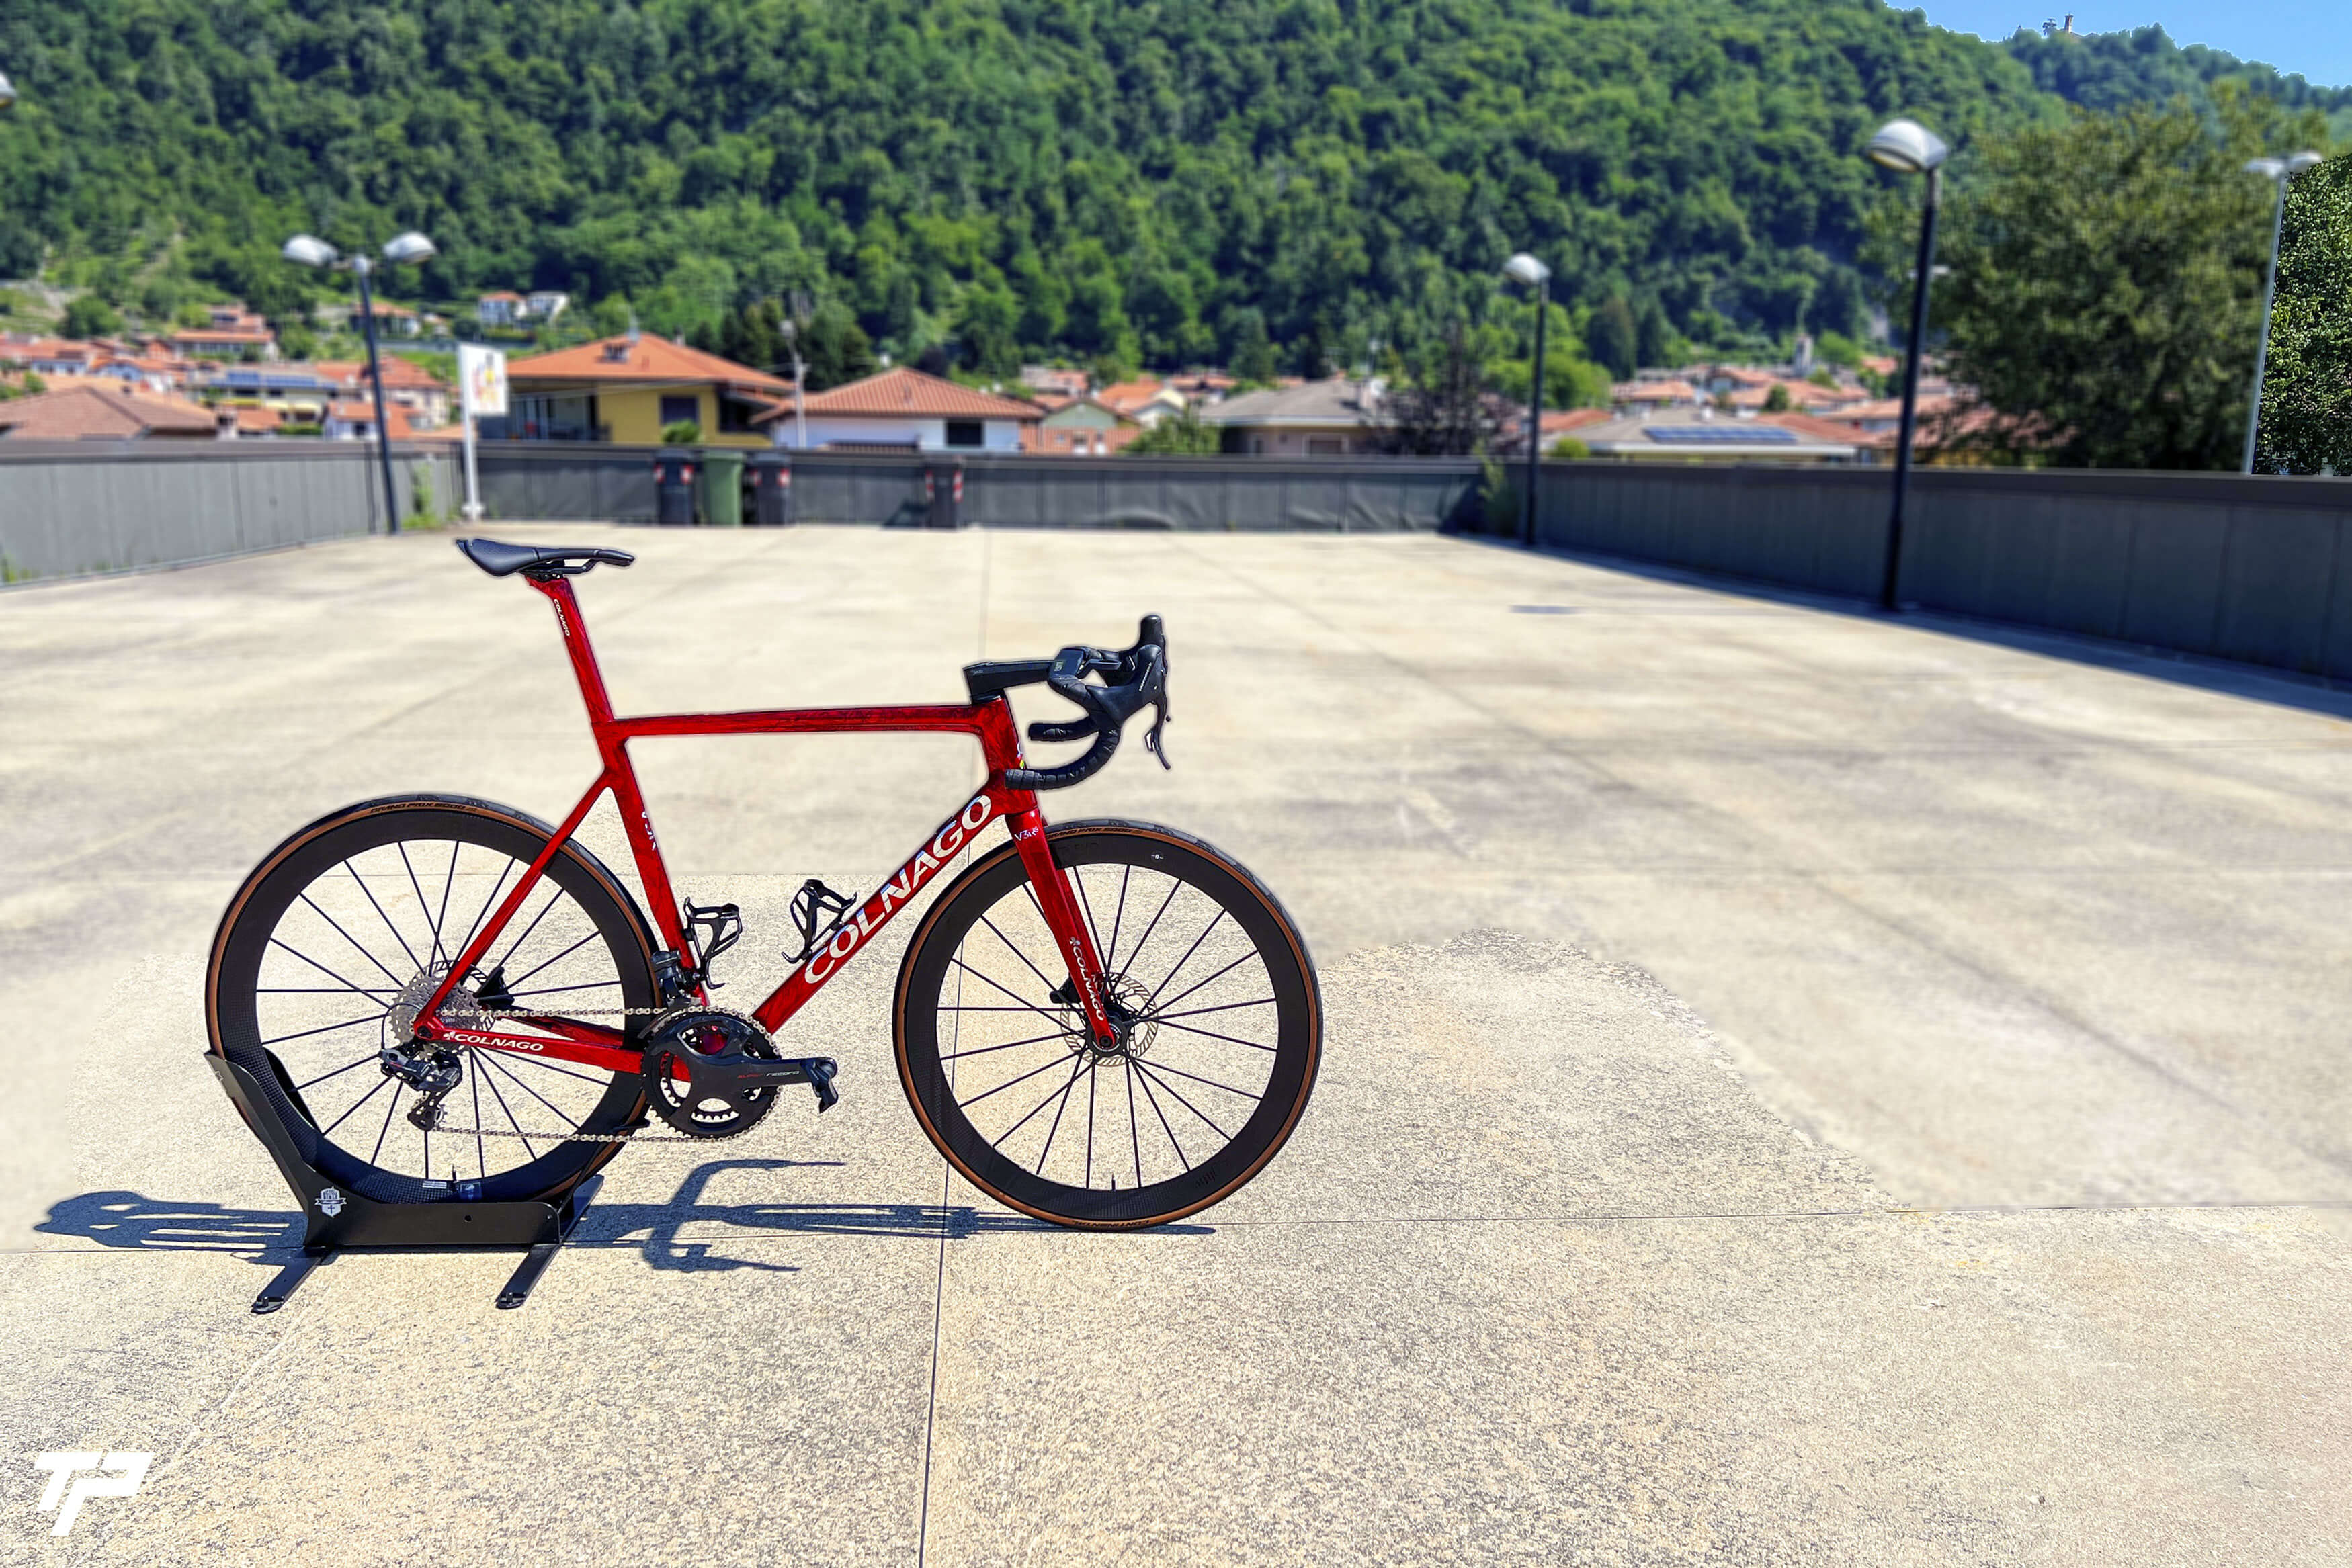 COLNAGO V3RS FROZEN LTD: THE EXPRESSION OF ITALIAN EXCELLENCE